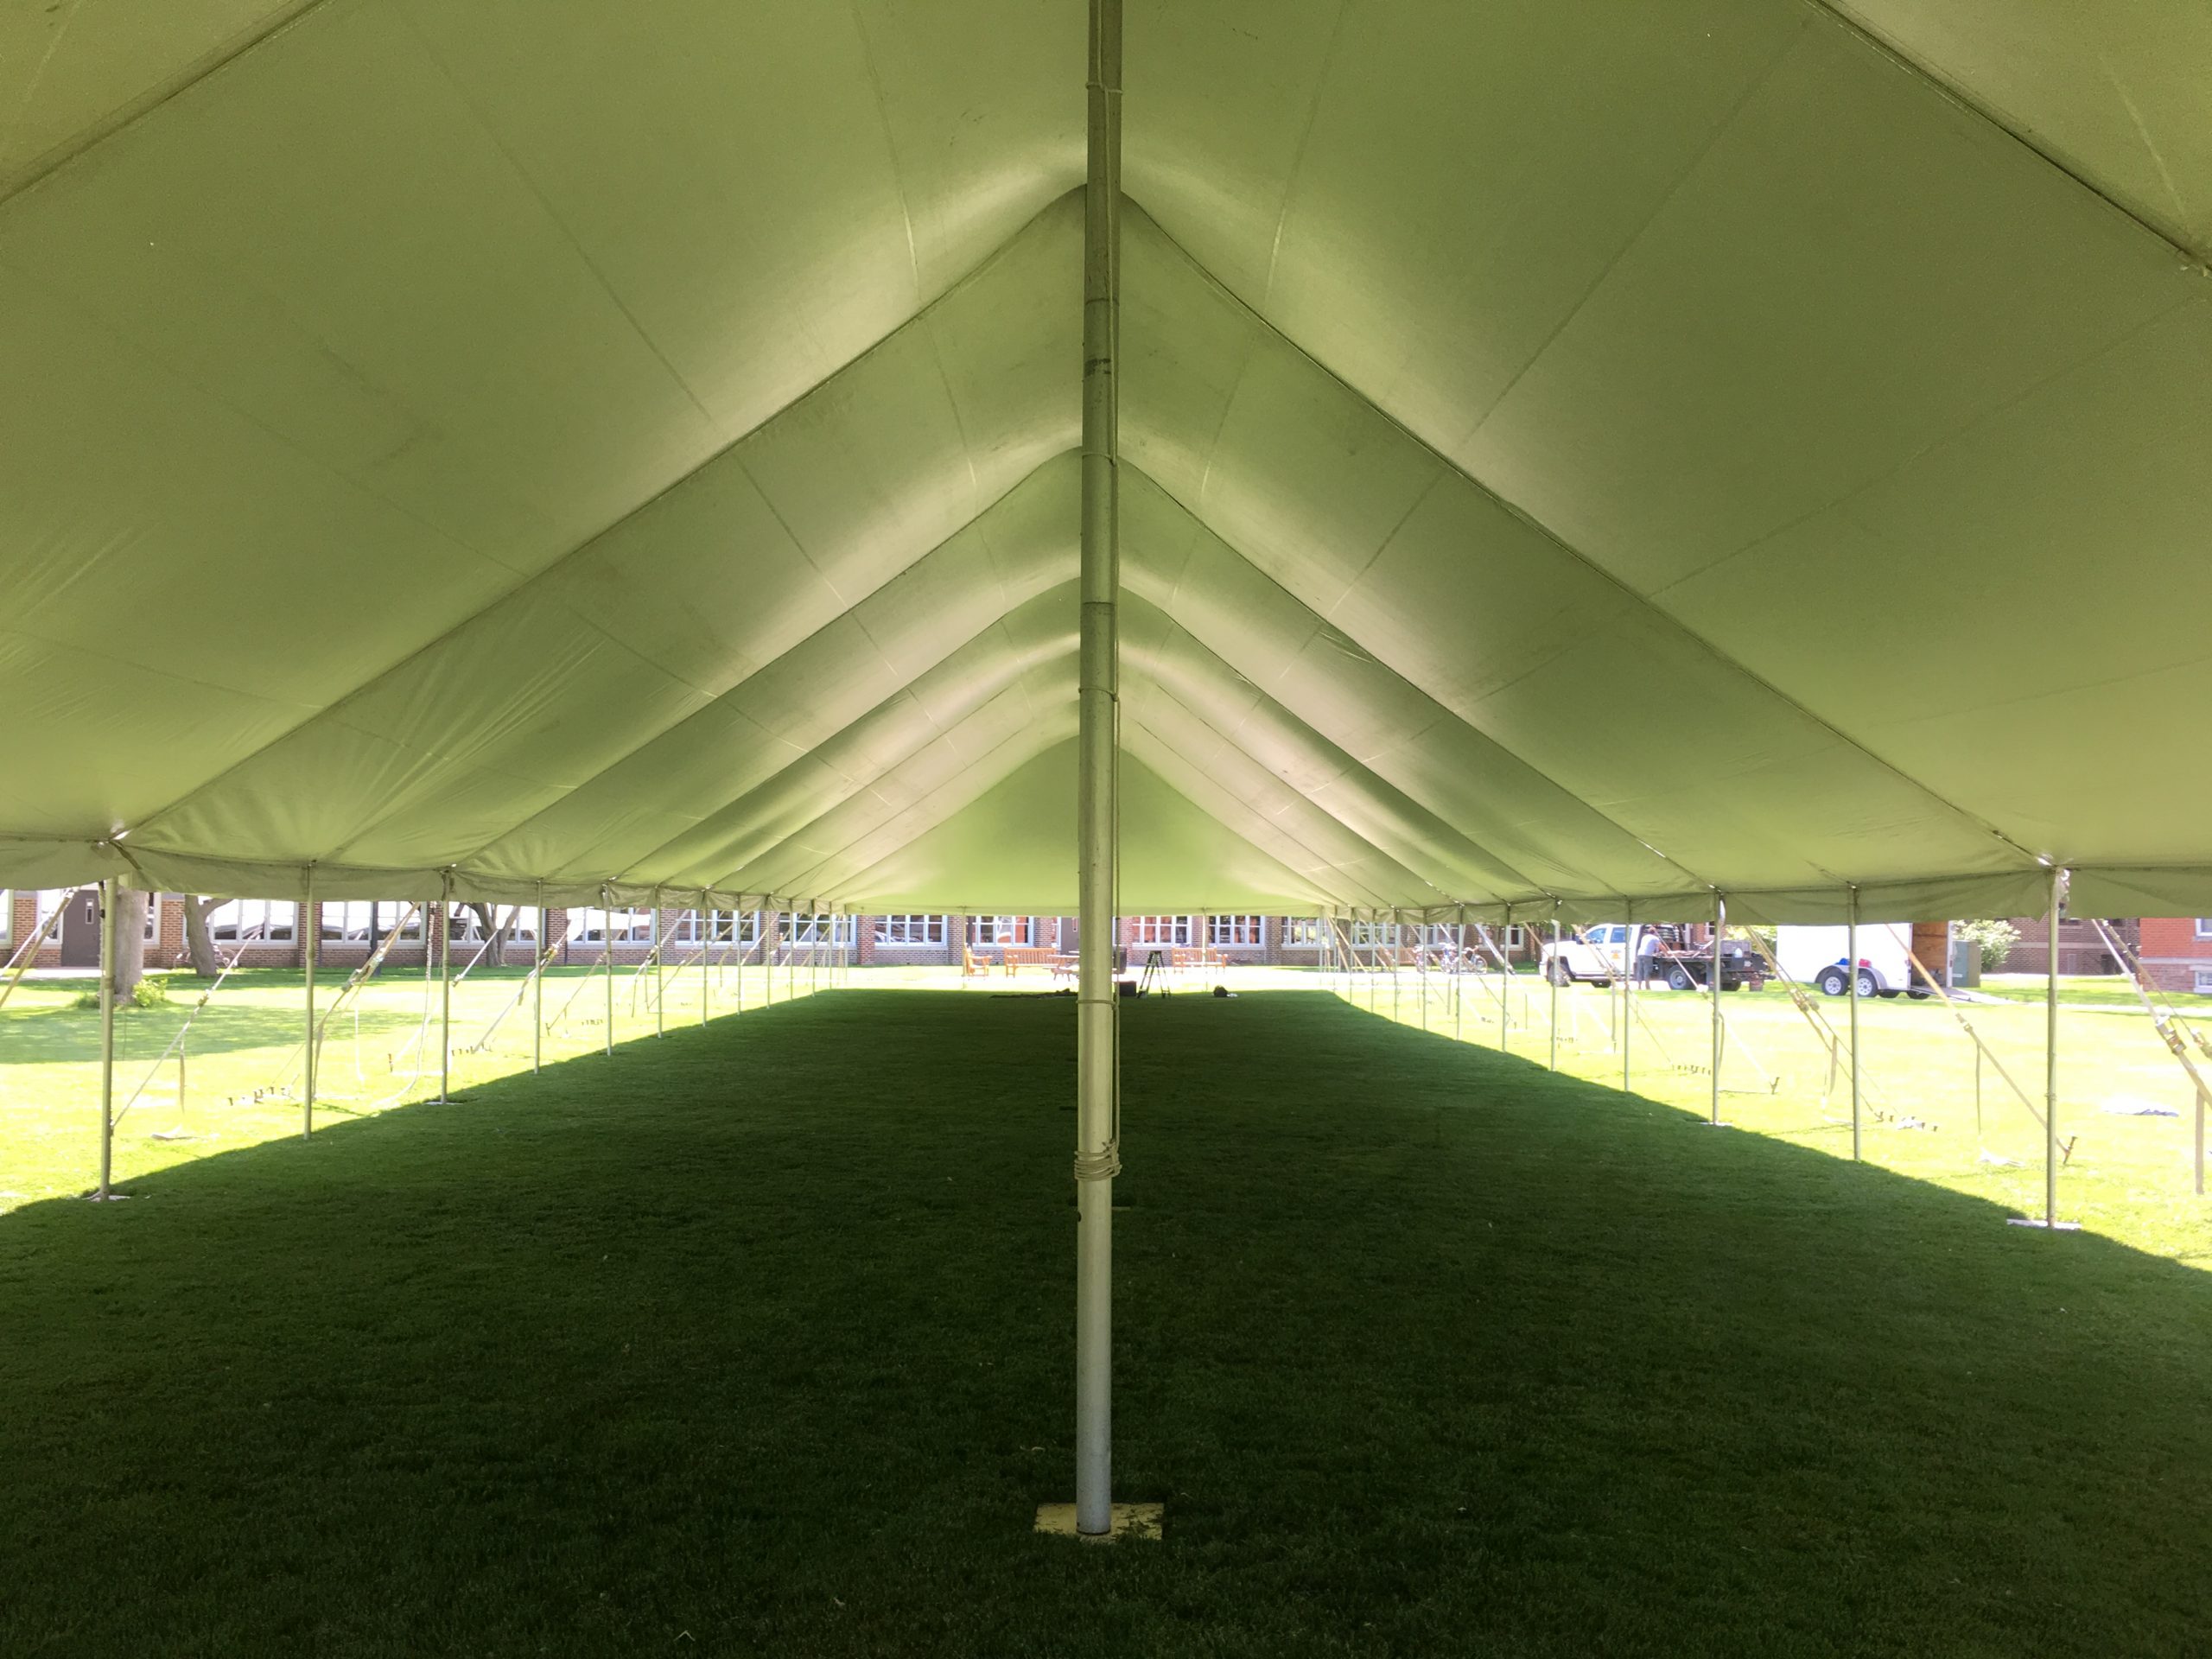 Under the middle of a 40' x 160' rope and pole tent for Commencement at Grinnell College 2016